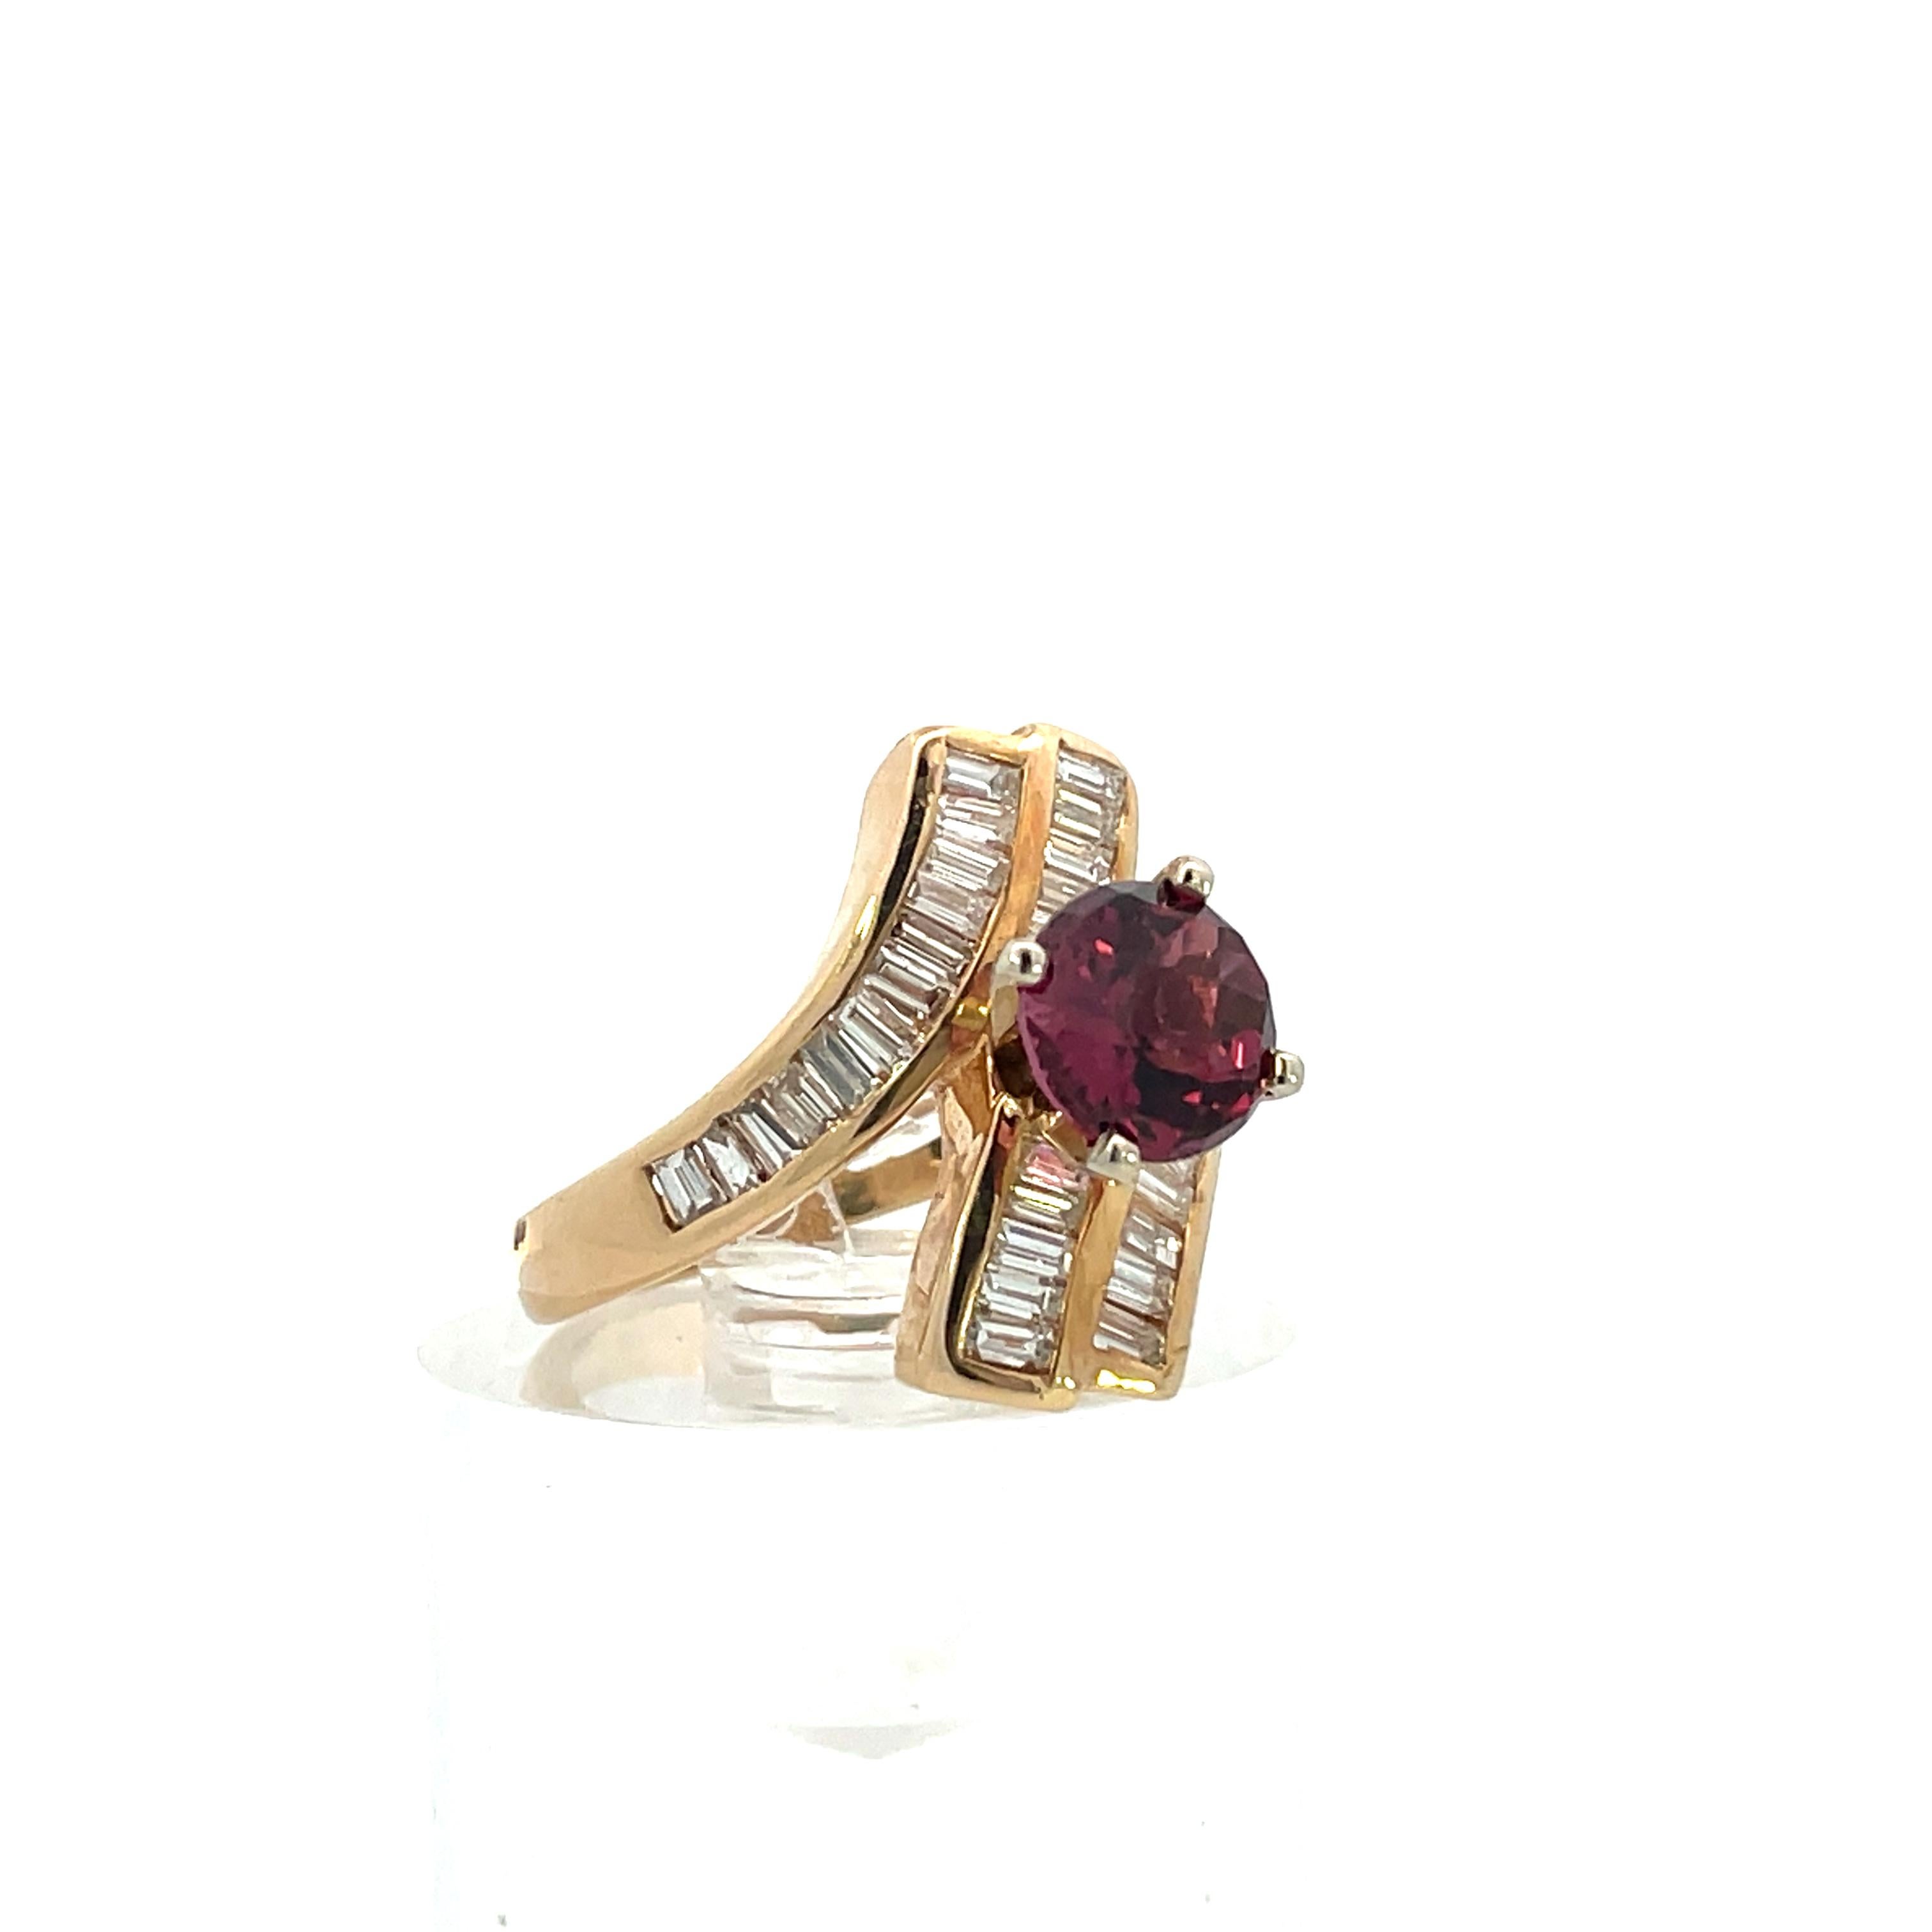 This is a beautiful contemporary ring, made in 14k yellow gold, featuring a red garnet with white baguette diamonds. The ring features three total bands, all showcasing 33 - G/H color VS2 baguette diamonds. The two outer bands passing the center of